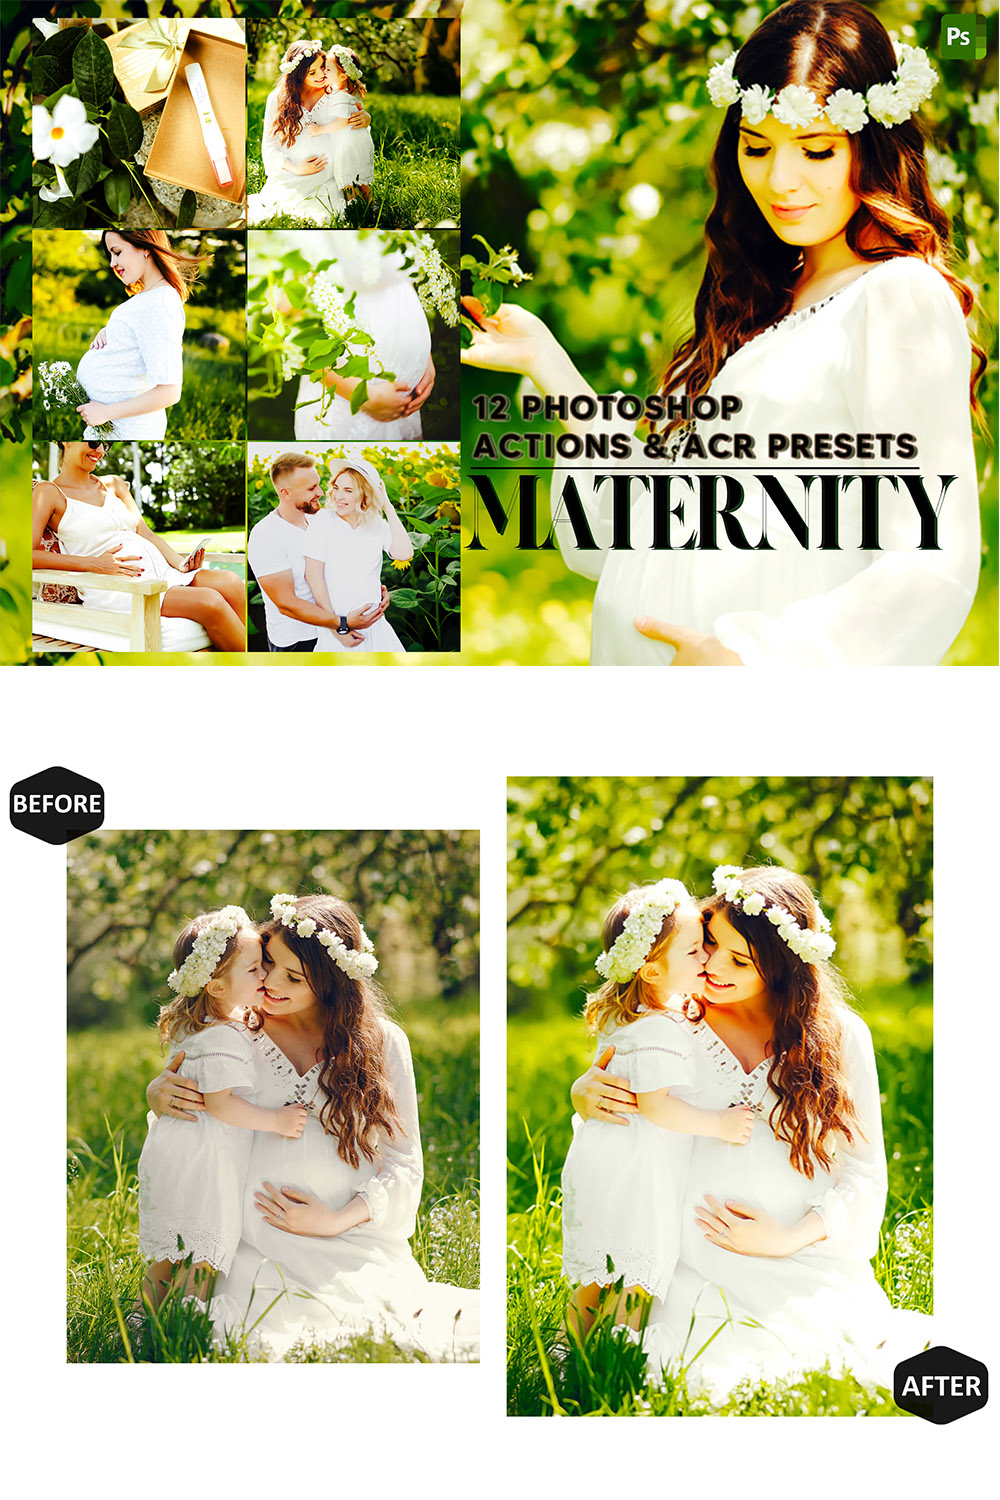 12 Photoshop Actions, Maternity Ps Action, Pregnancy ACR Preset, Summer Ps Filter, Atn Portrait And Lifestyle Theme For Instagram, Blogger pinterest preview image.